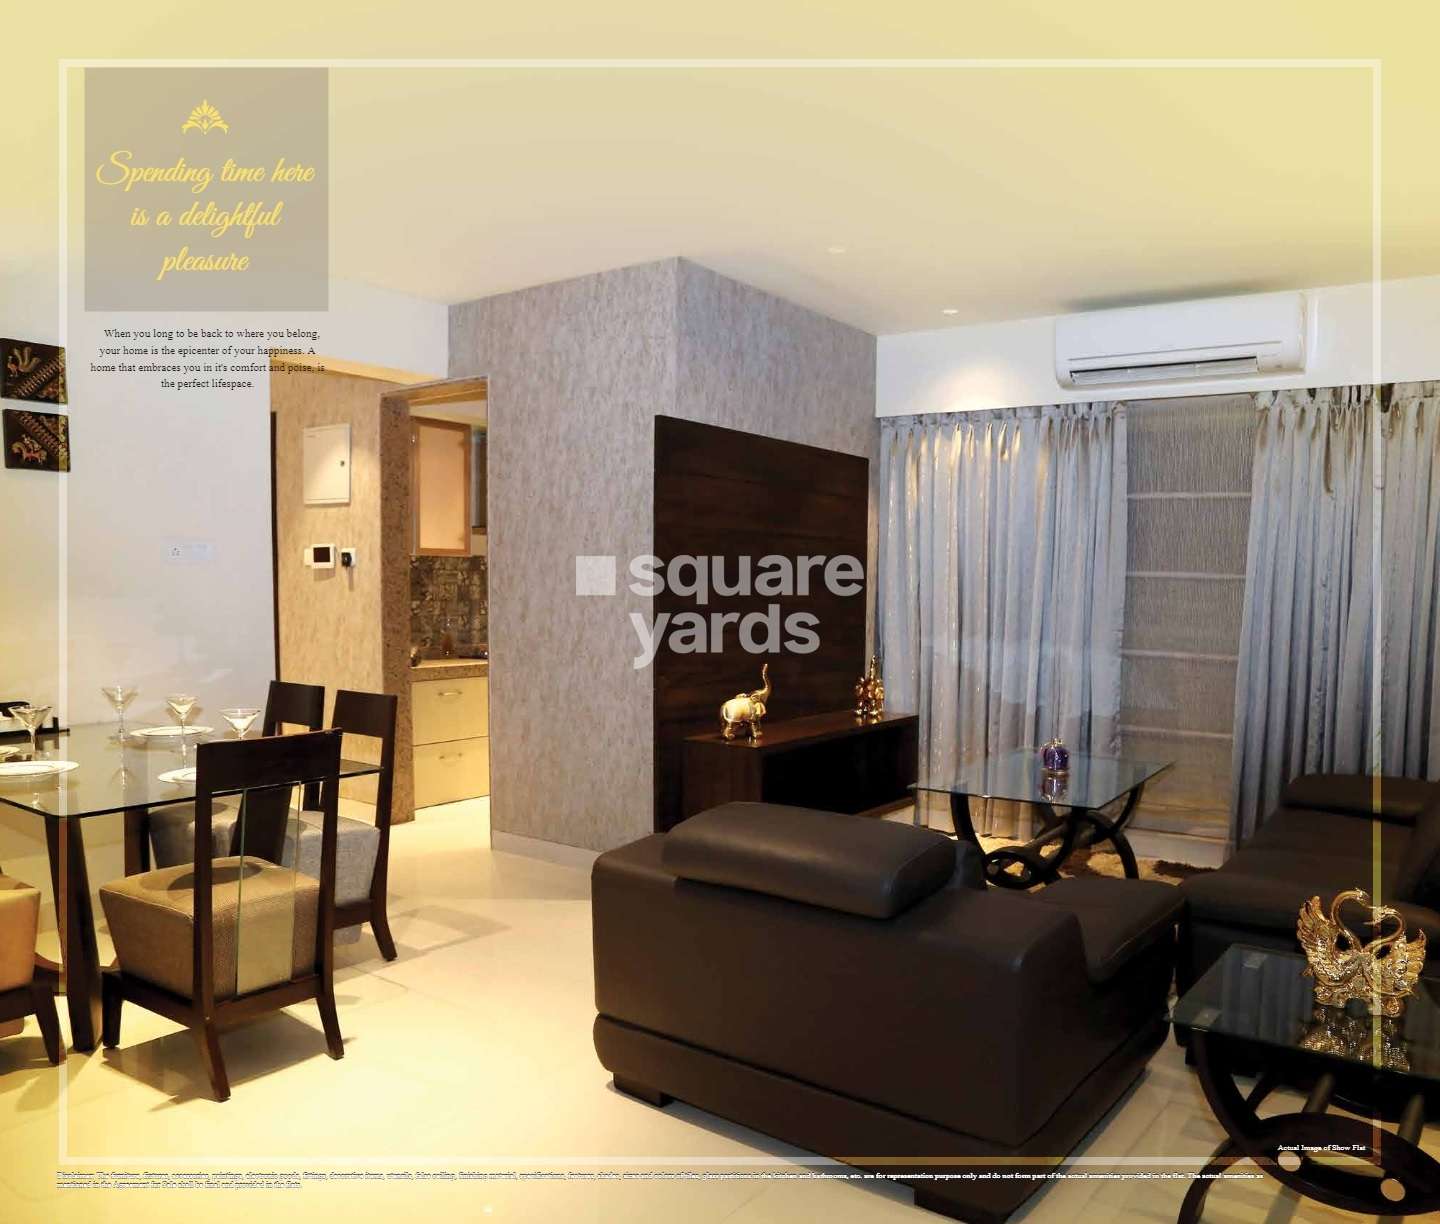 tharwani solitaire project apartment interiors1 7171